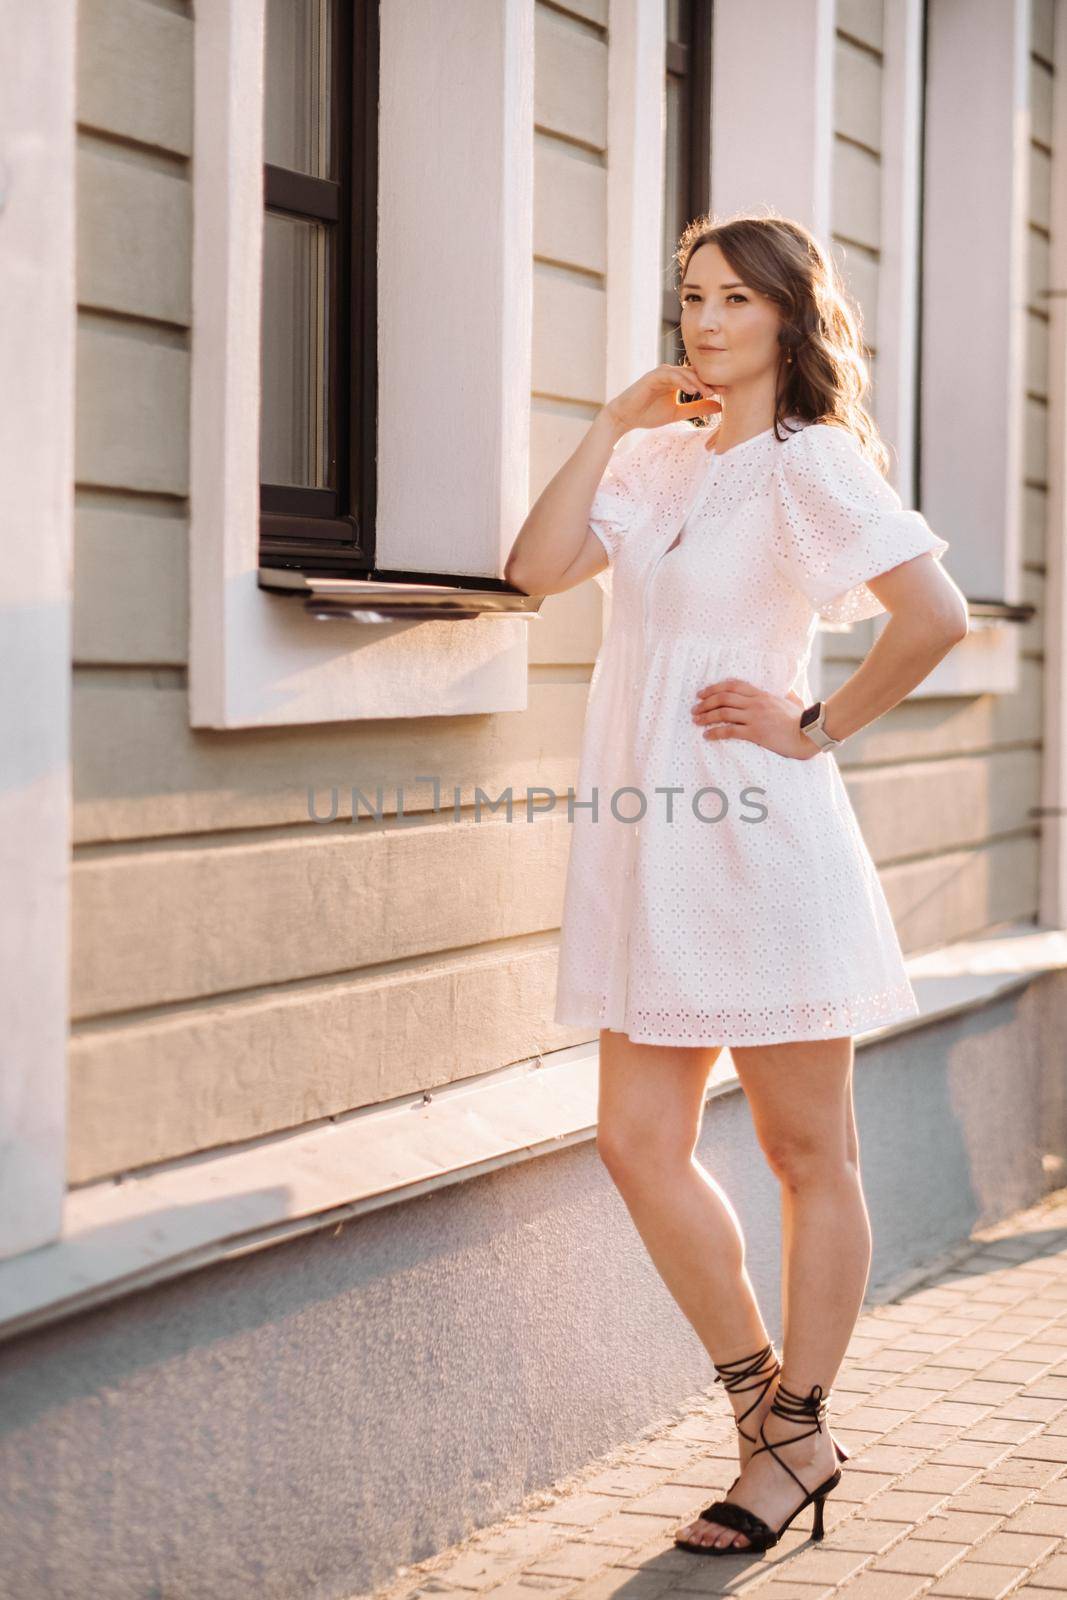 A beautiful woman in a white dress at sunset in the city. Evening street photography by Lobachad